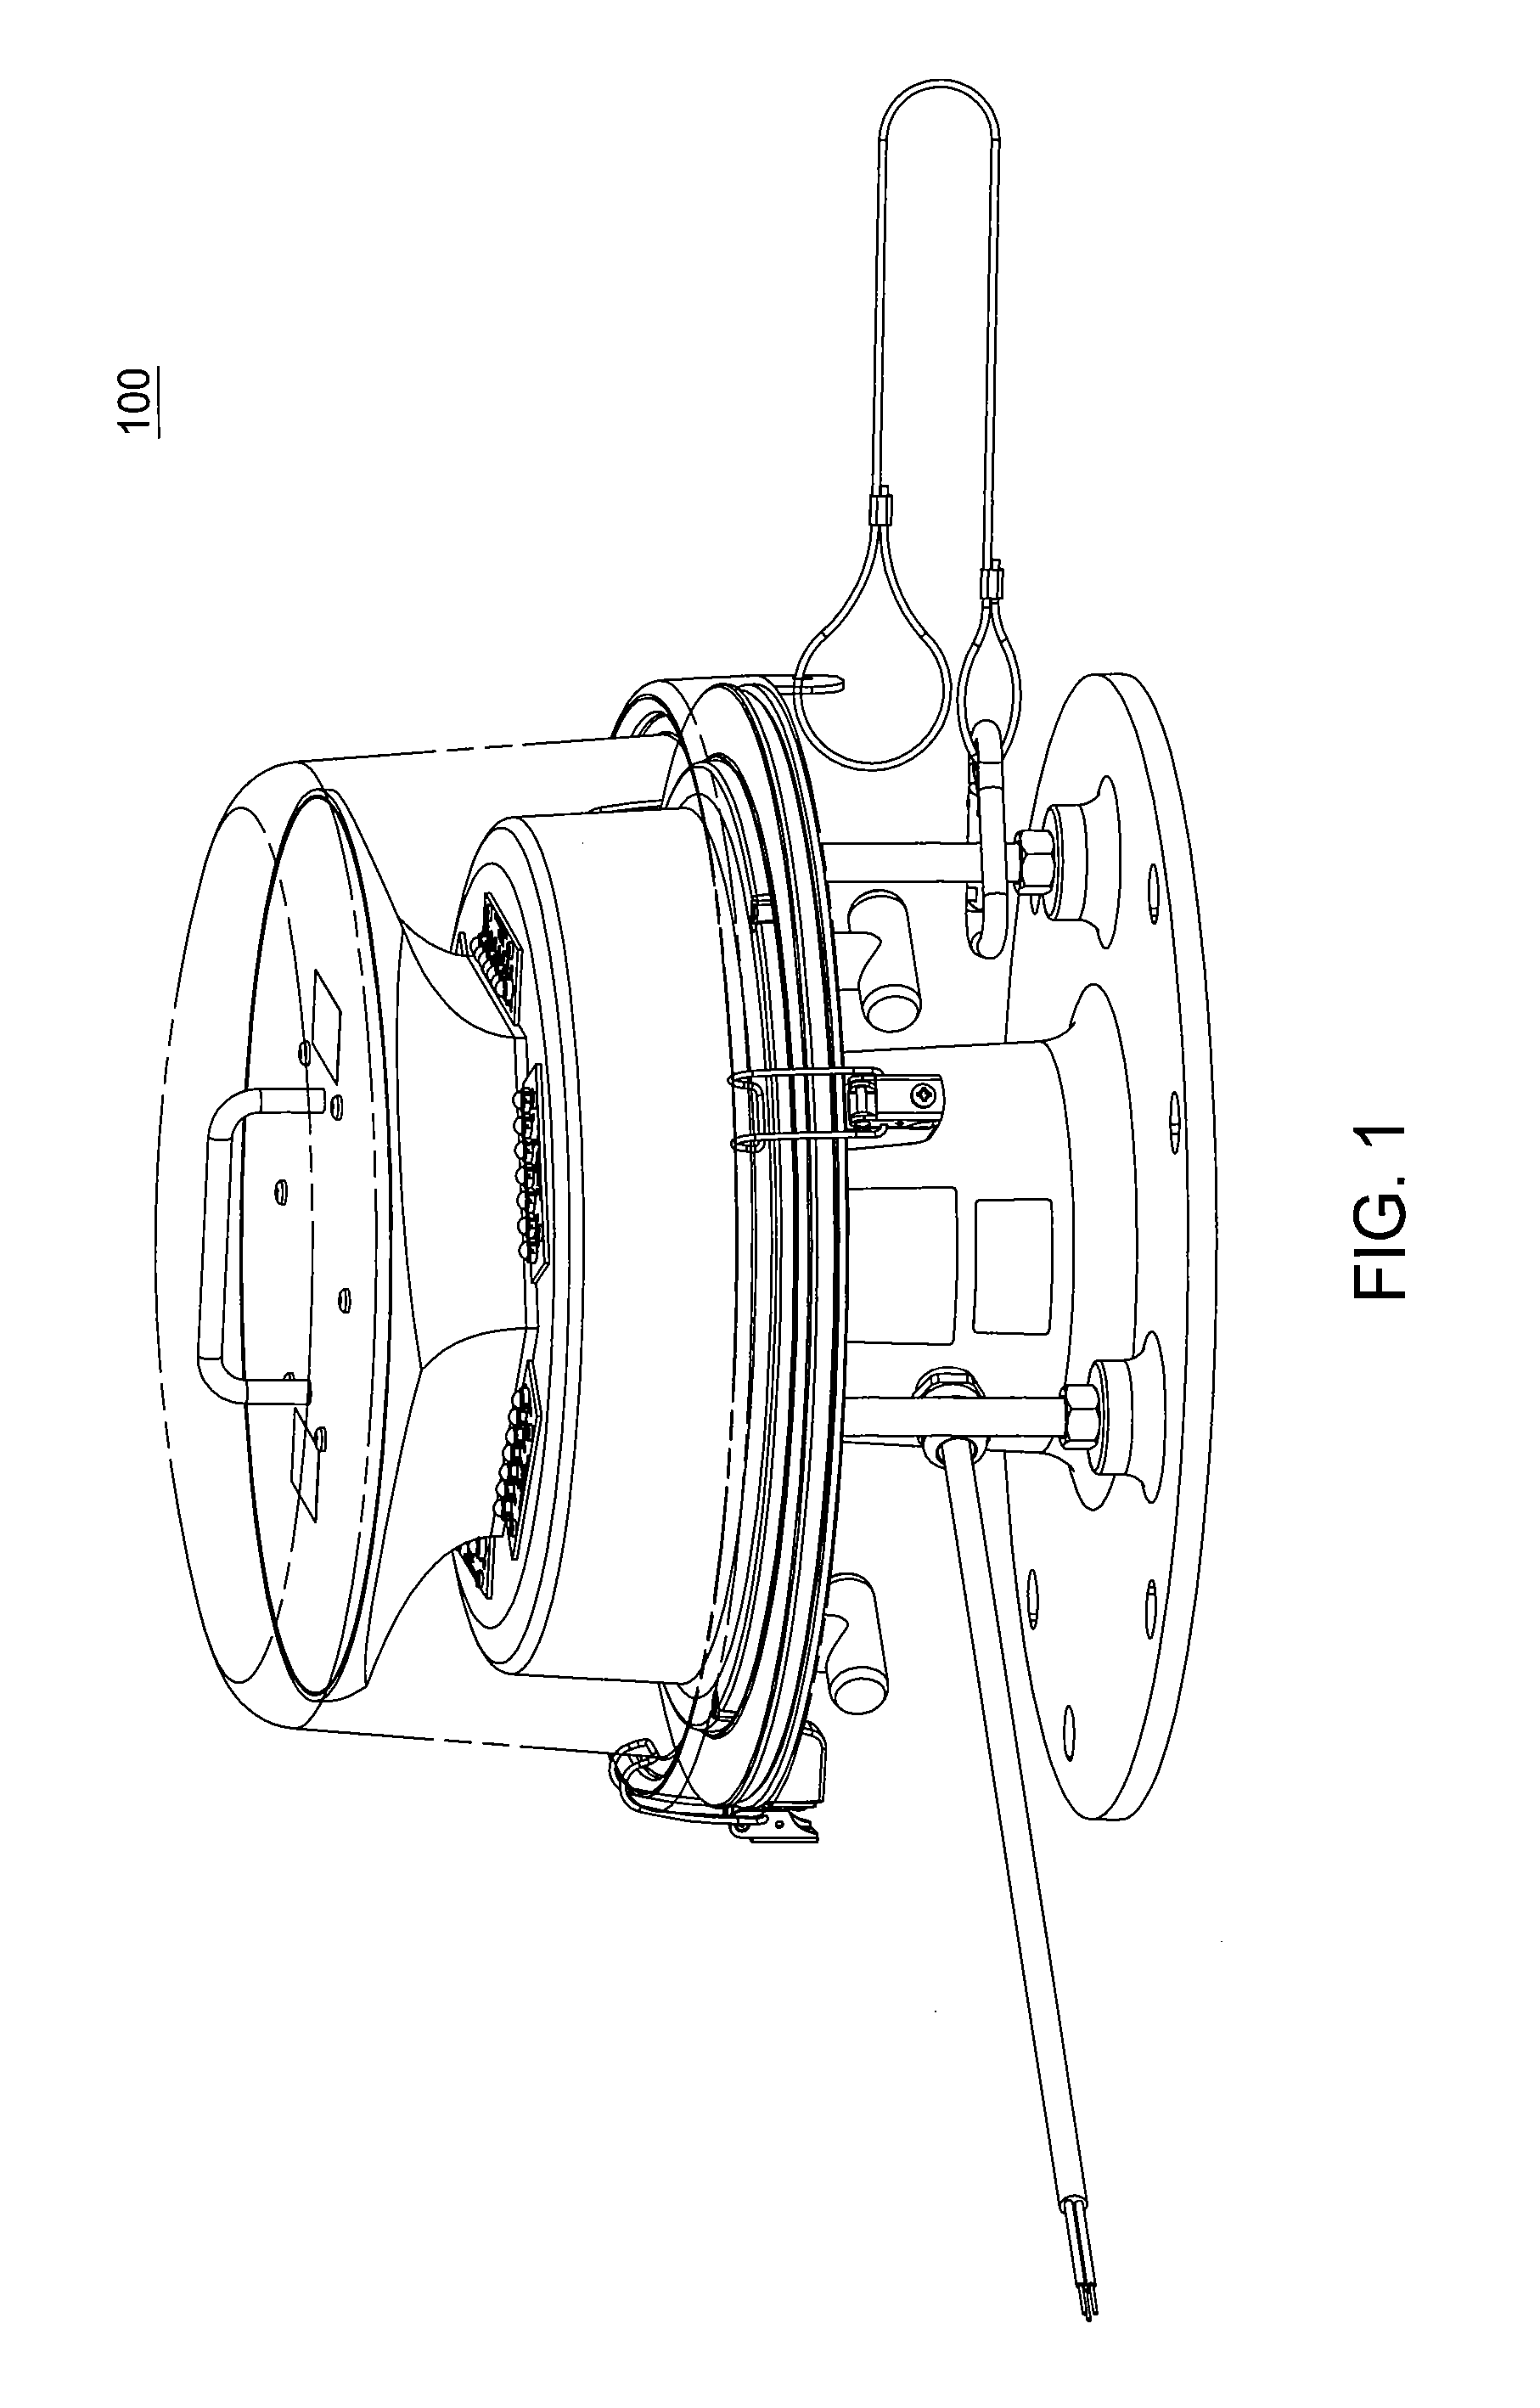 Method and apparatus for providing an LED light for use in hazardous locations